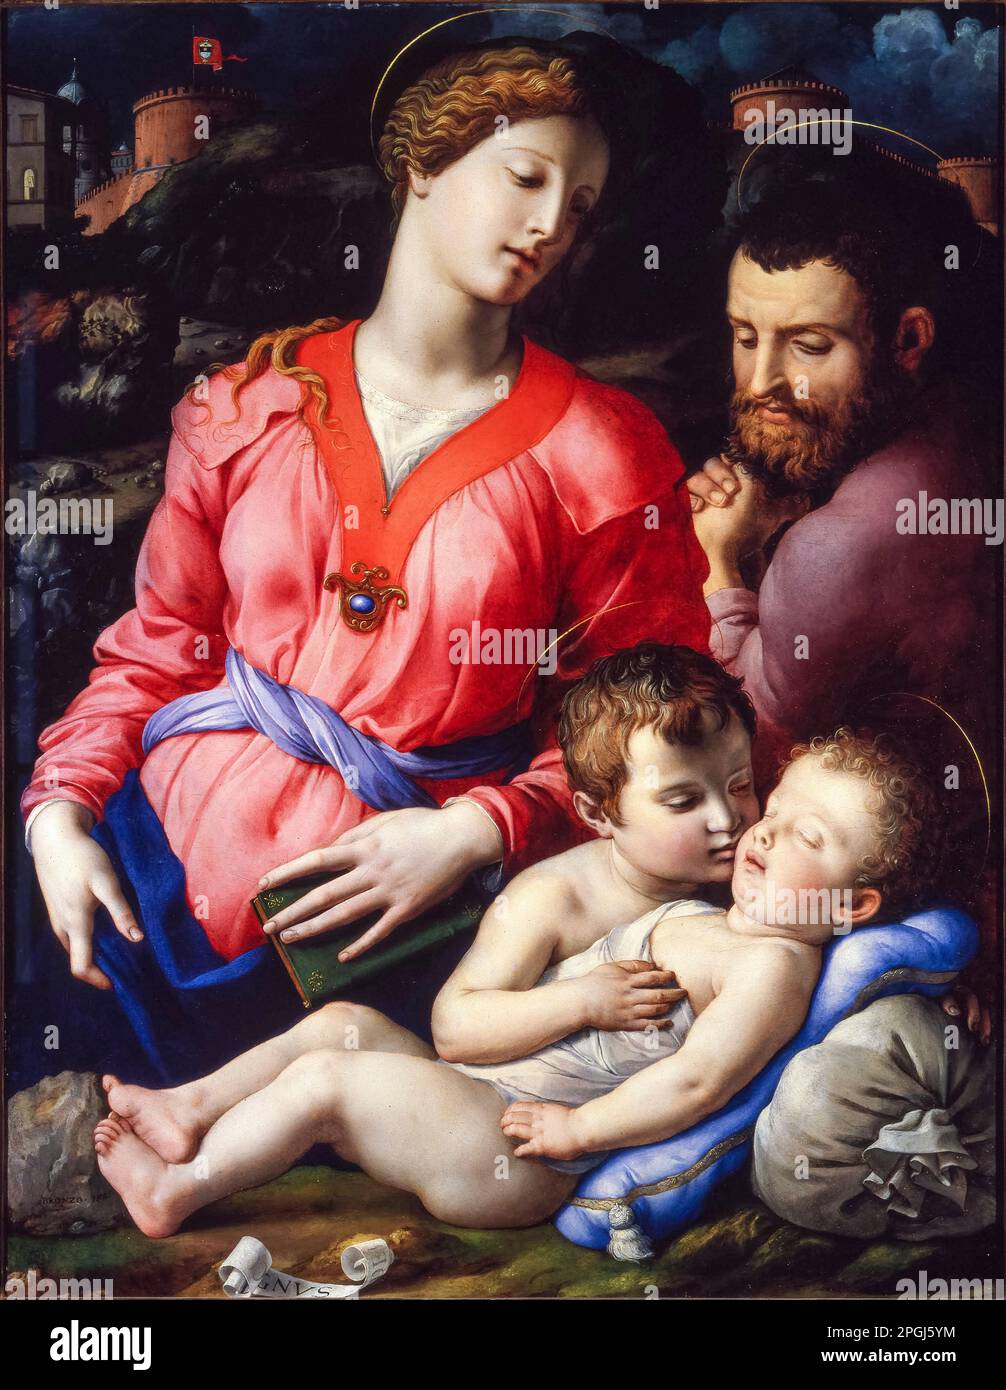 The Panciatichi Holy Family, painting in oil on panel by Agnolo Bronzino, circa 1540 Stock Photo